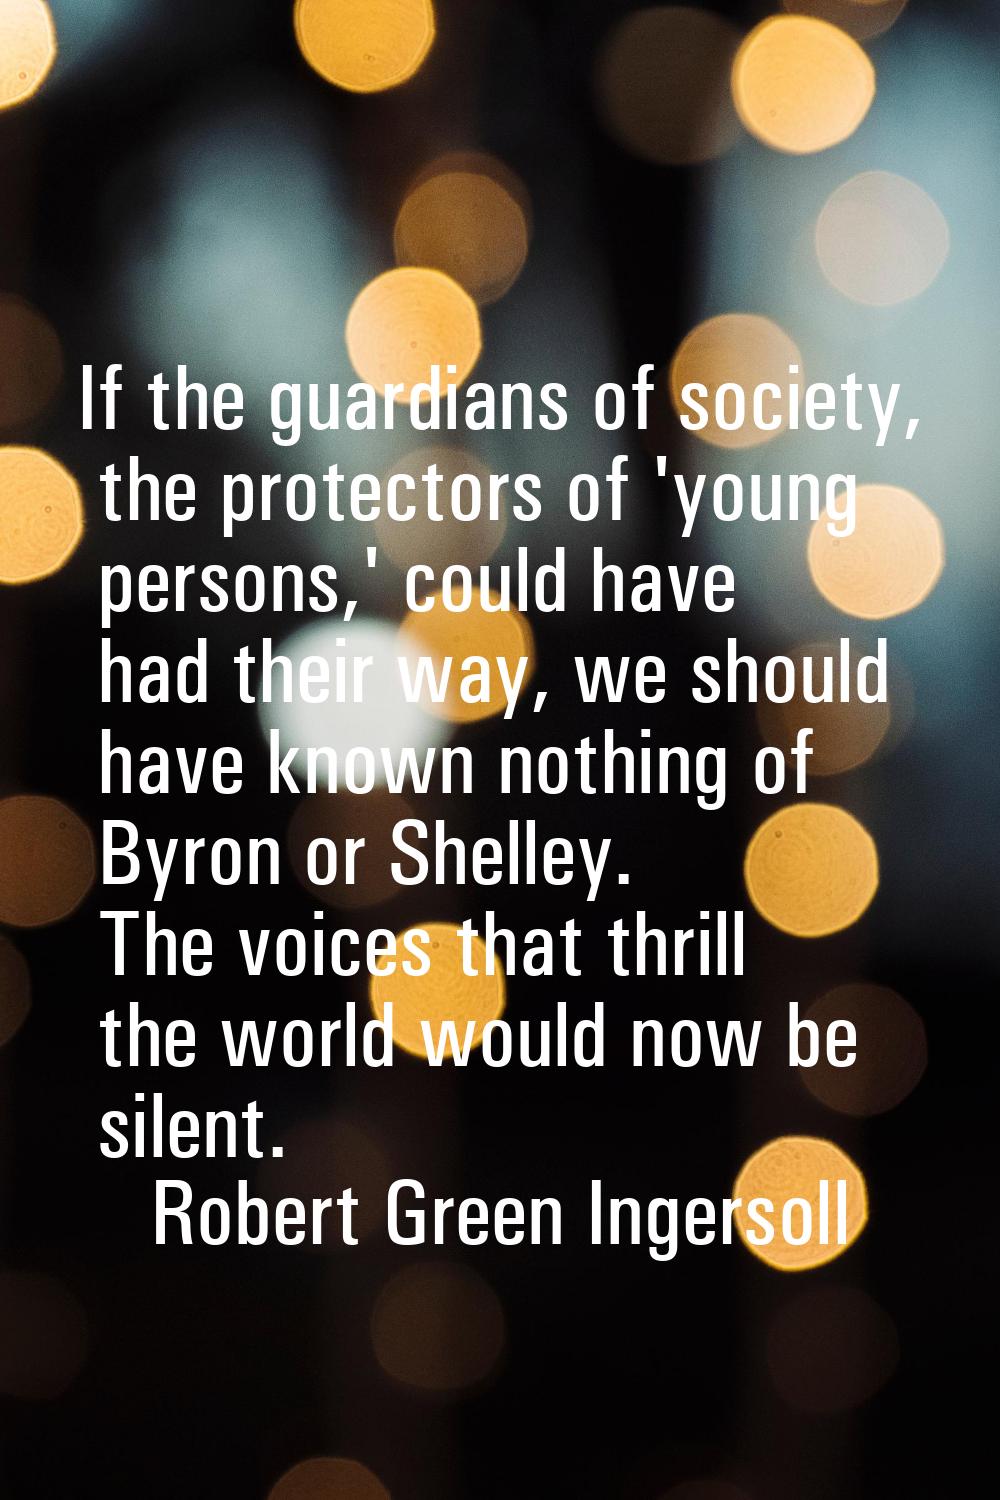 If the guardians of society, the protectors of 'young persons,' could have had their way, we should